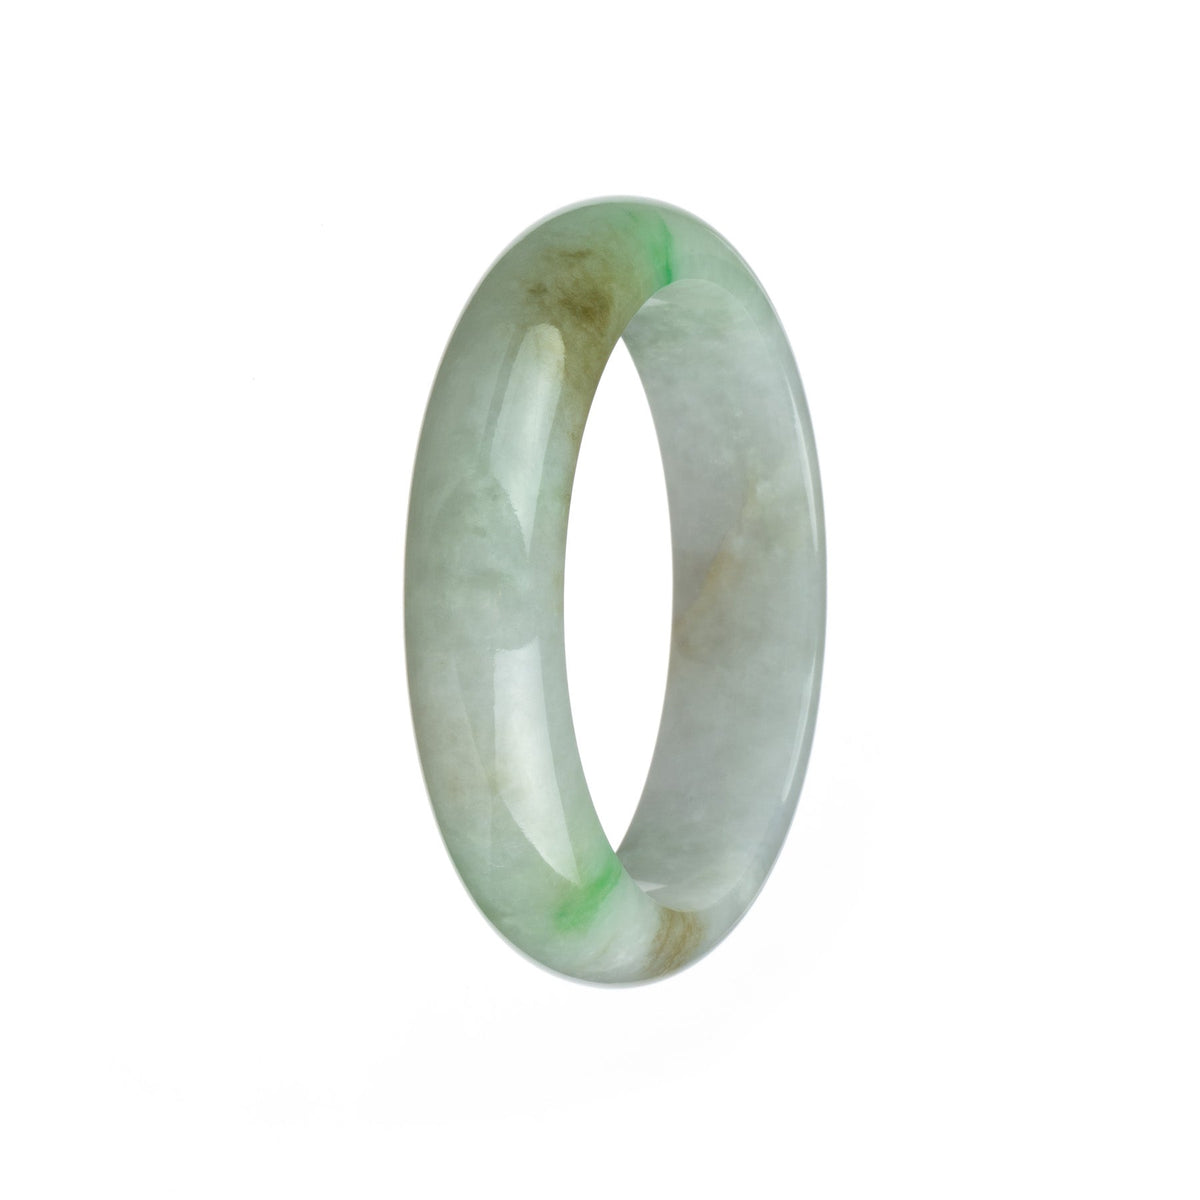 Authentic Grade A White with Apple Green Jadeite Bangle - 57mm Half Moon